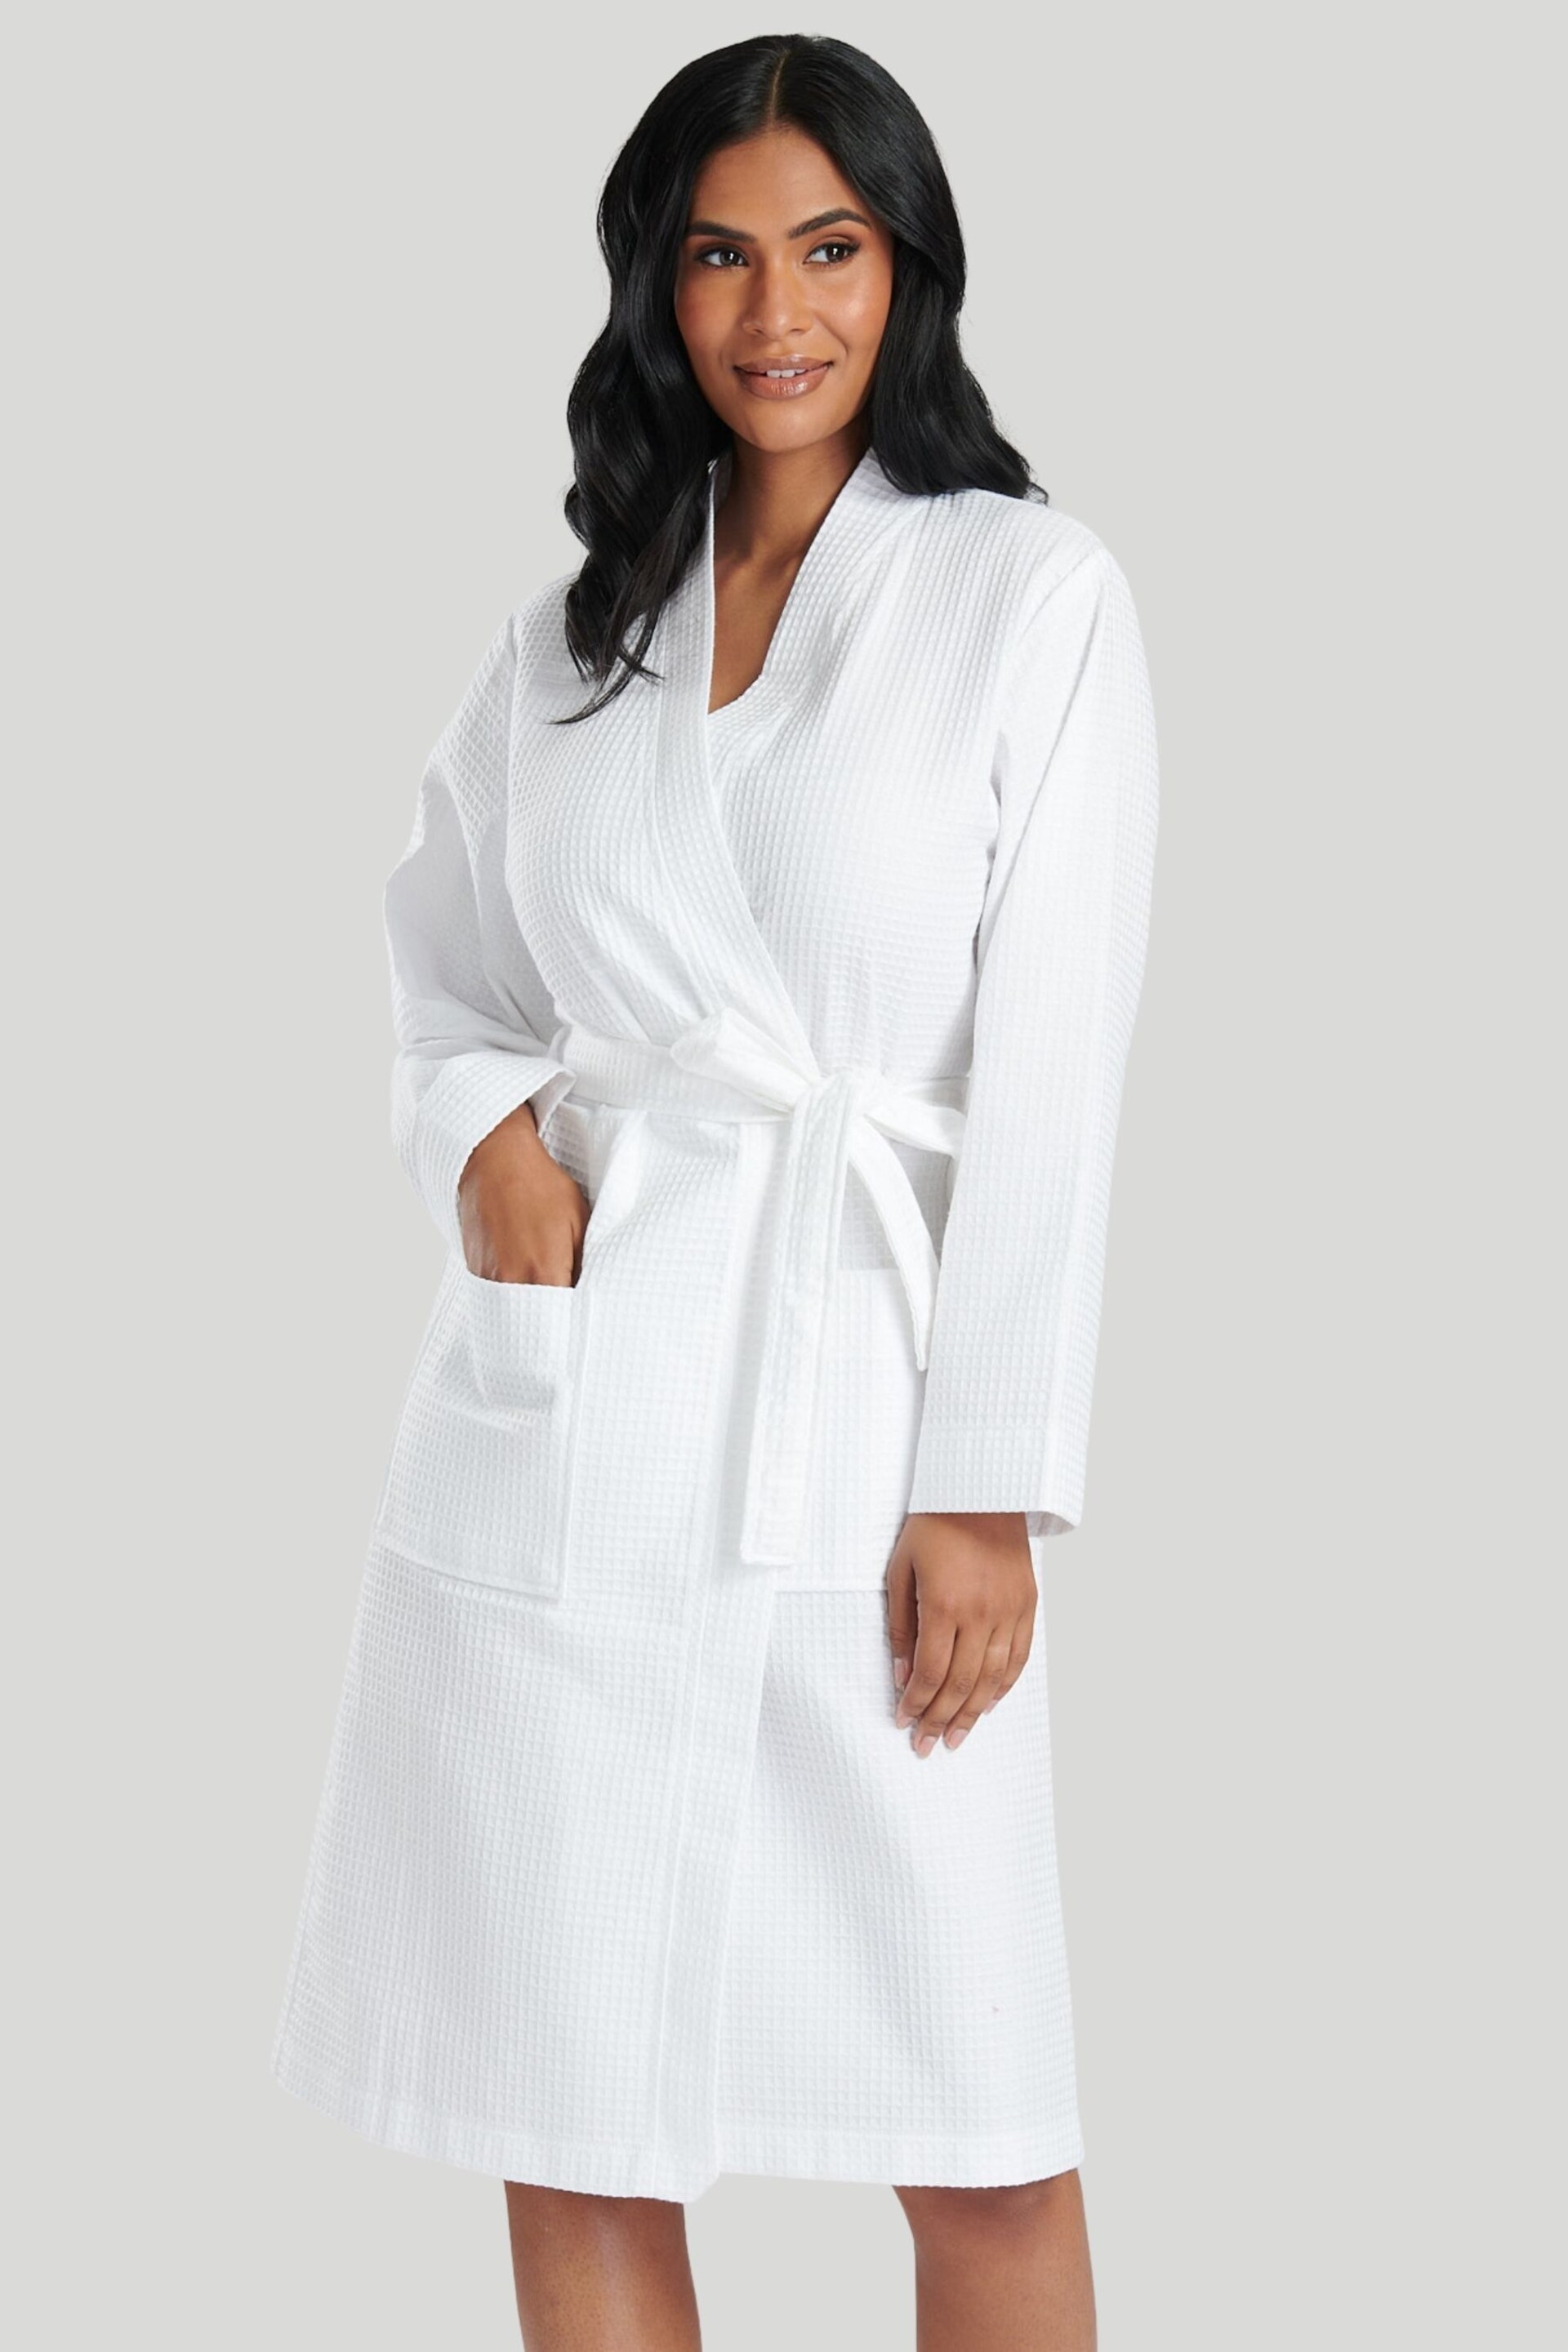 Loungeable White Cotton Waffle Robe - Image 2 of 7